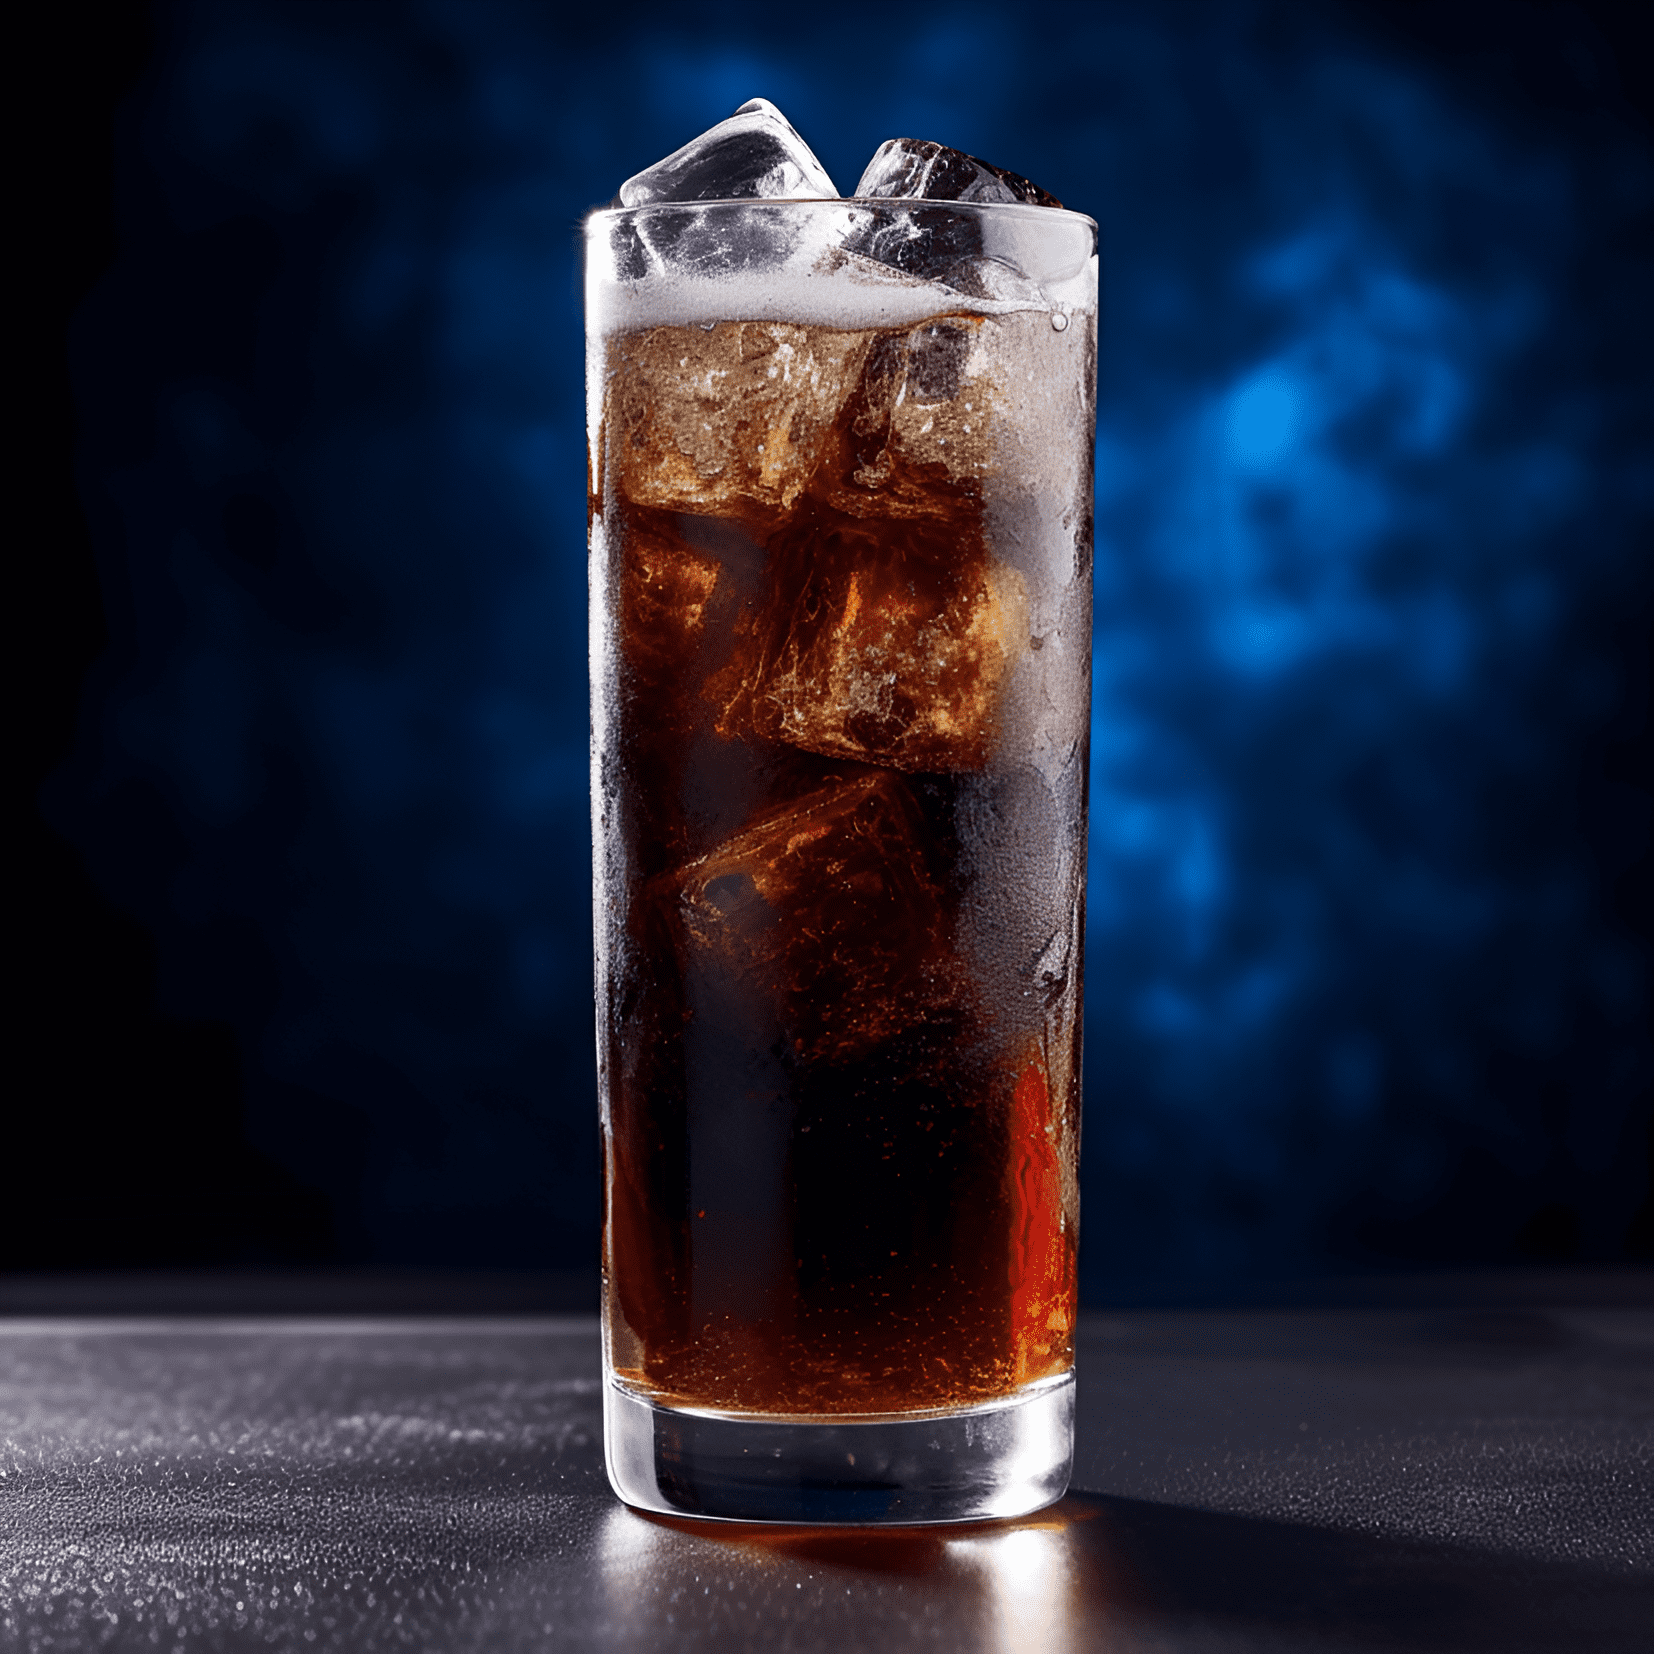 Black Cat Cocktail Recipe - The Black Cat cocktail is a rich, velvety drink with a complex flavor profile. It is slightly sweet with a hint of bitterness, and has a smooth, creamy texture. The combination of coffee liqueur, vodka, and cola creates a bold, robust taste that is both refreshing and satisfying.